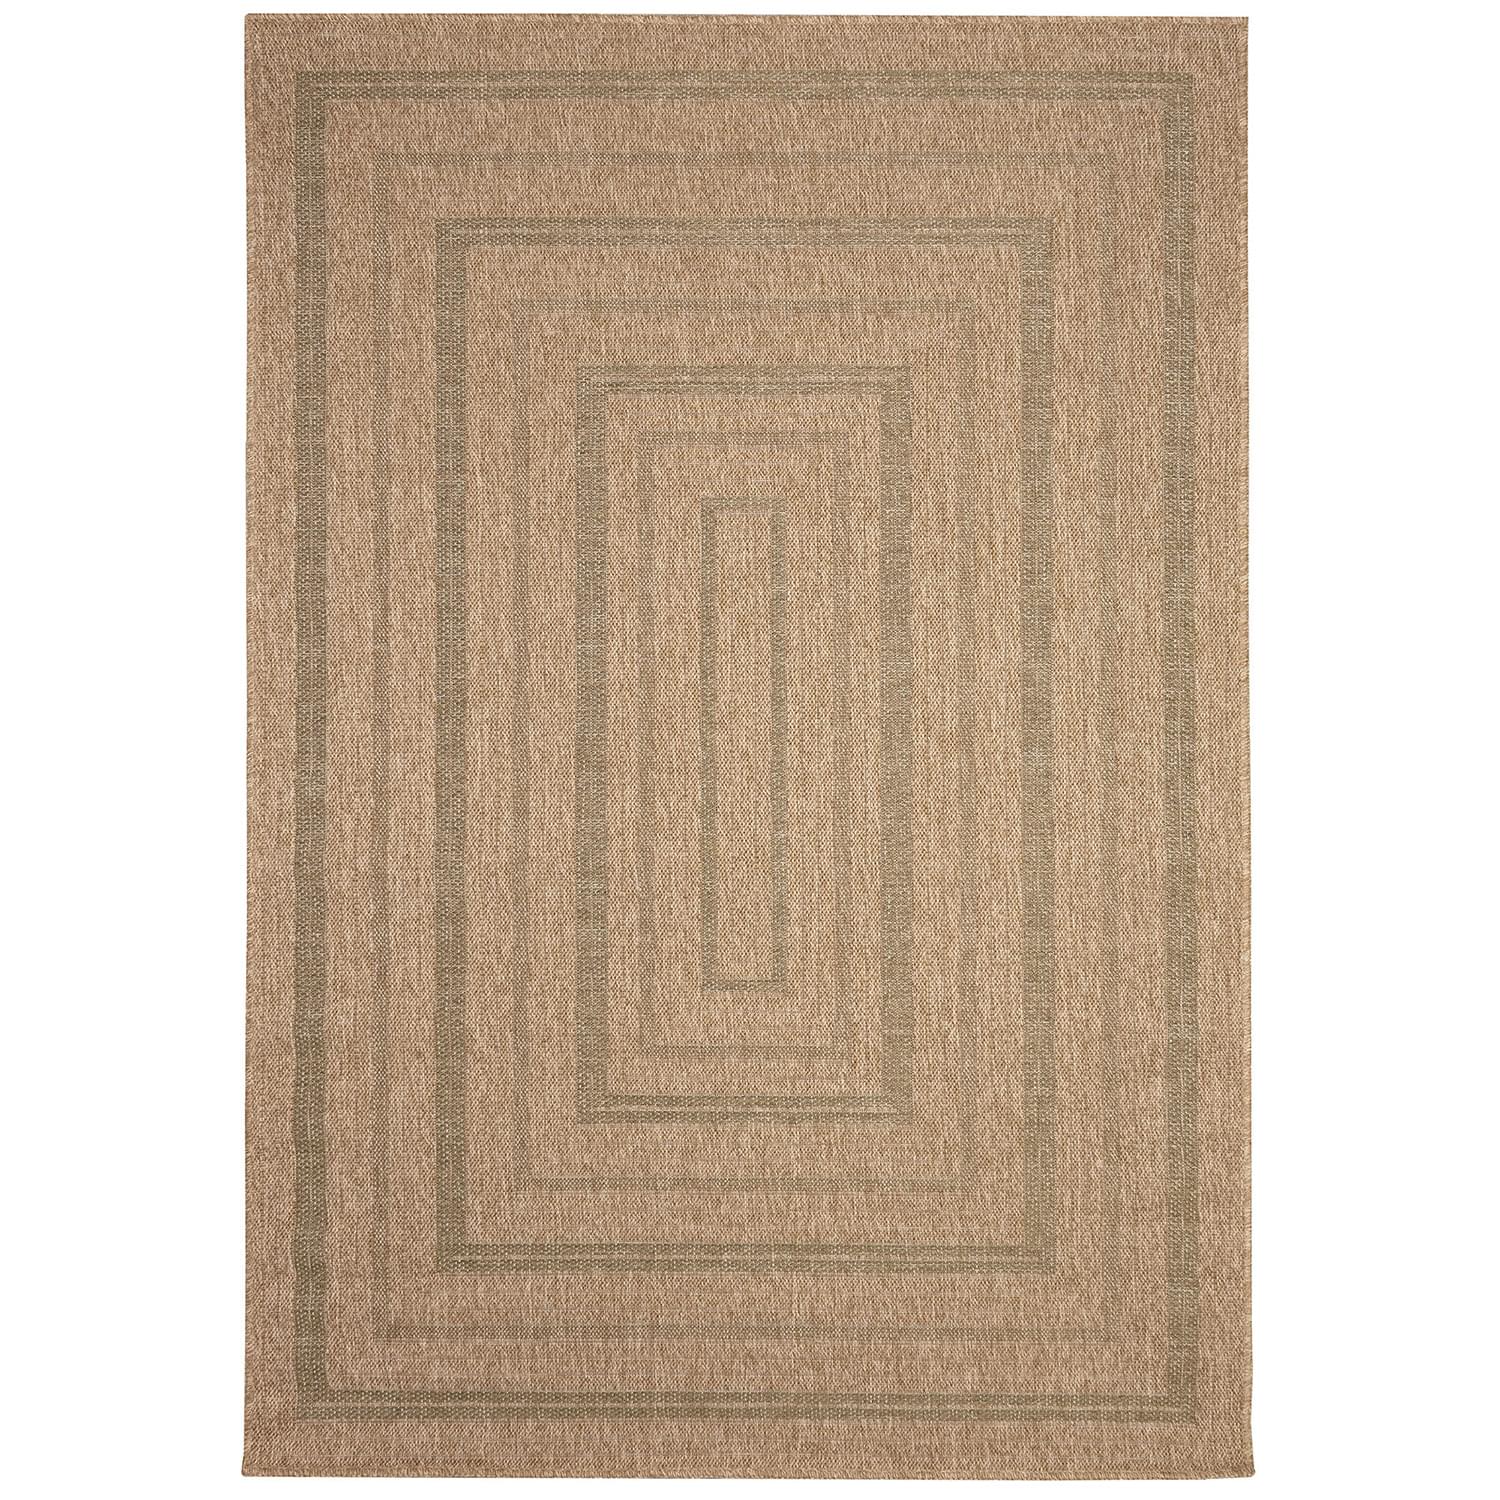 Liora Manne Sahara Low Profile  Easy Care Woven Weather Resistant Rug- Multi Border Green  Product Image